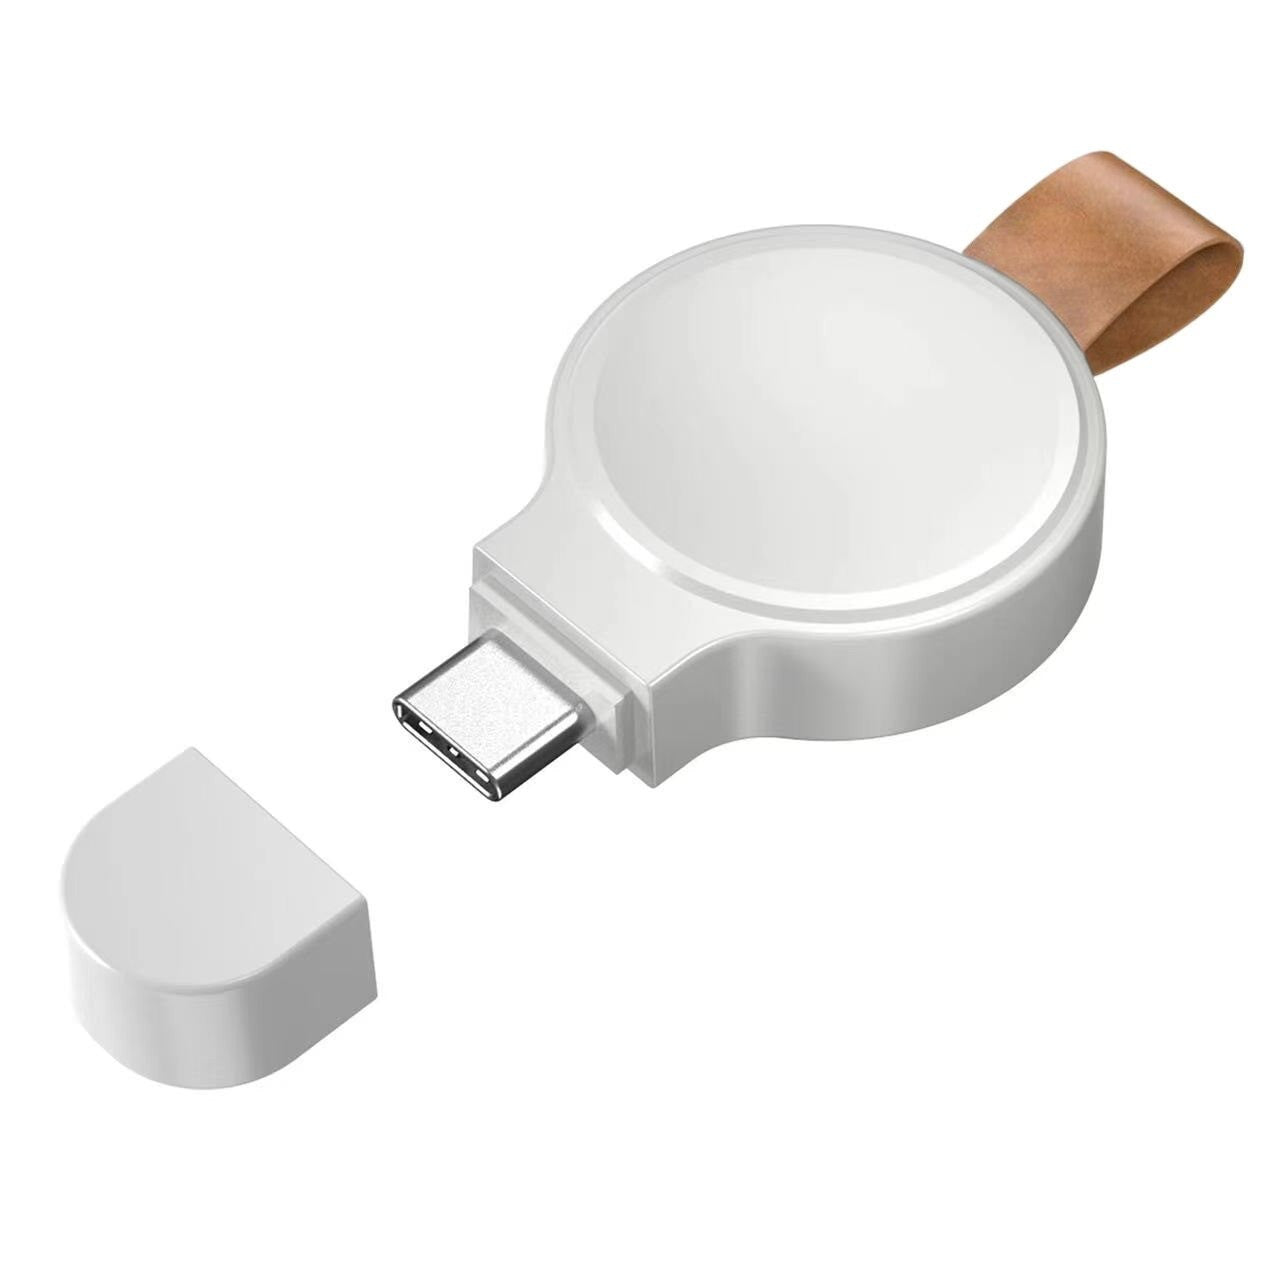 Portable Wireless Apple Watch Charger